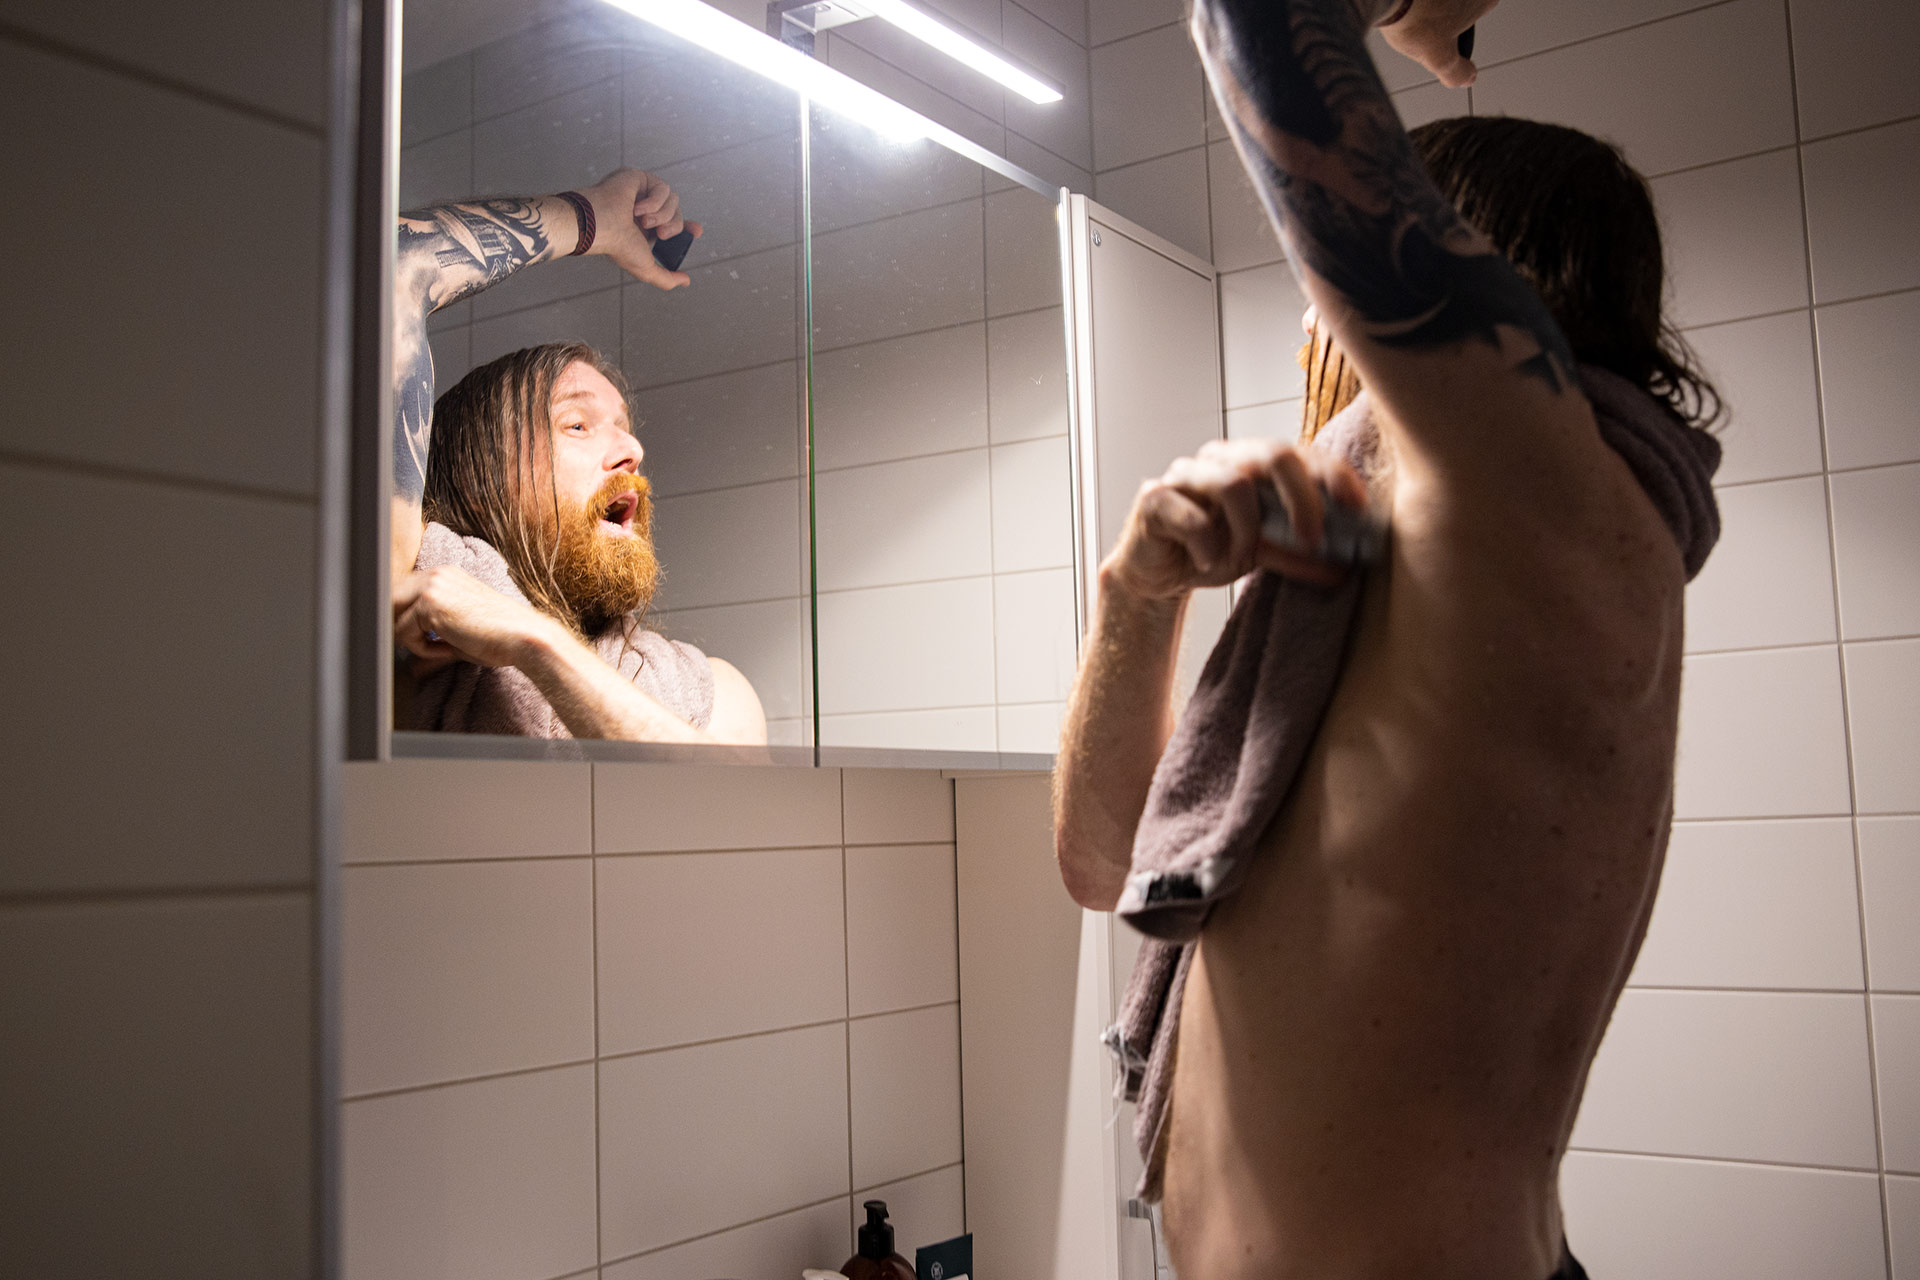 A man is applying deodorant in the bathroom in front of a mirror.